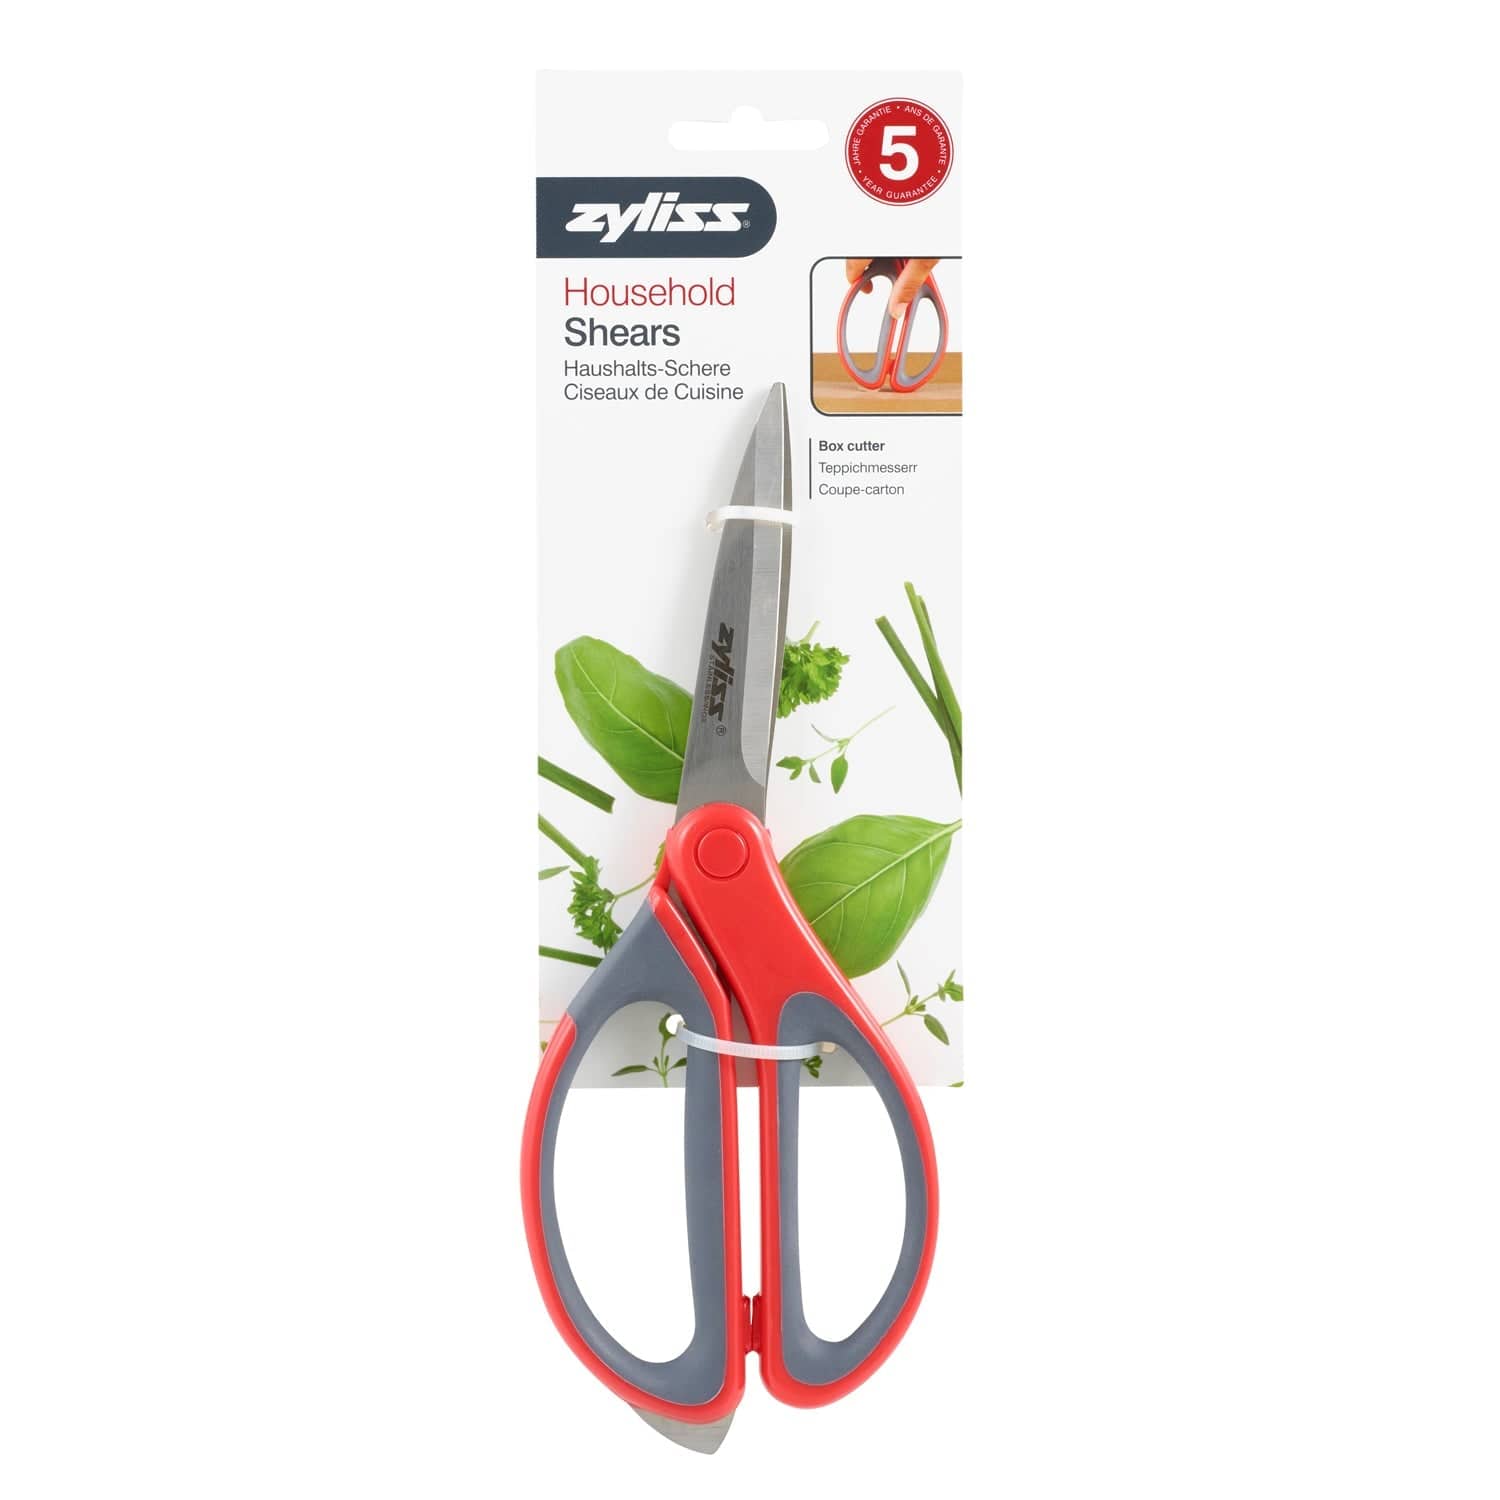 Household Shears With Integrated Box Cutter